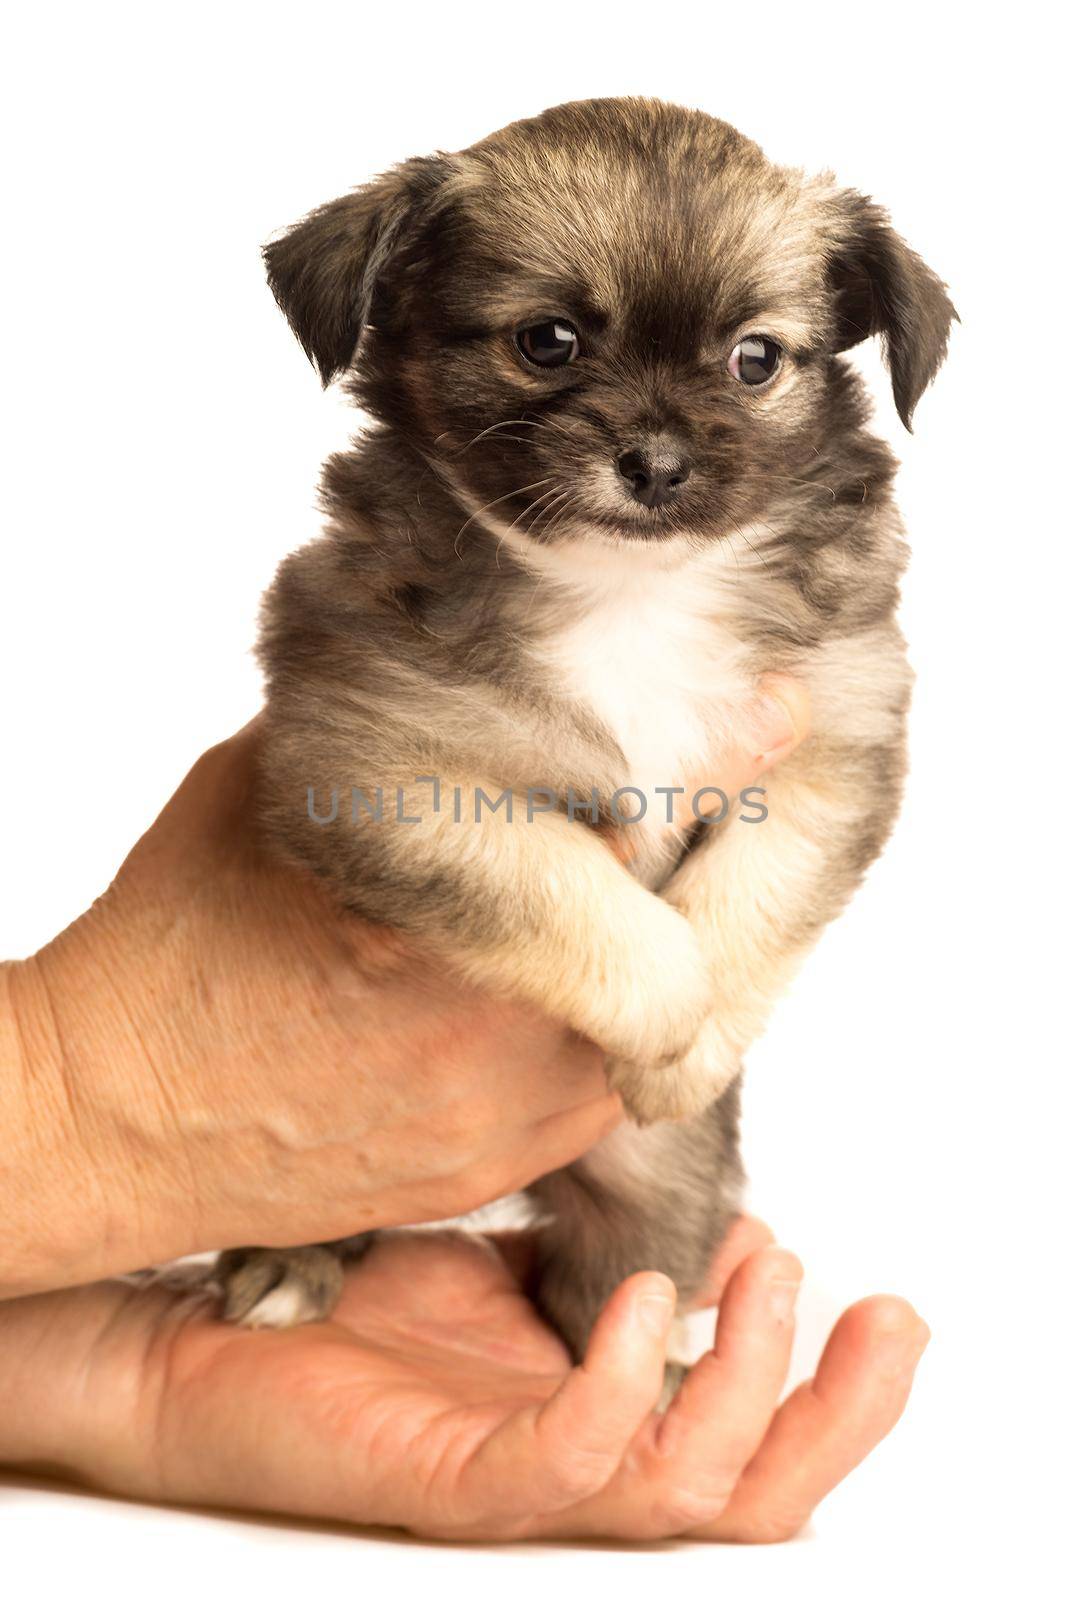 Cute little chihuahua puppy isolated in white background held in human hands